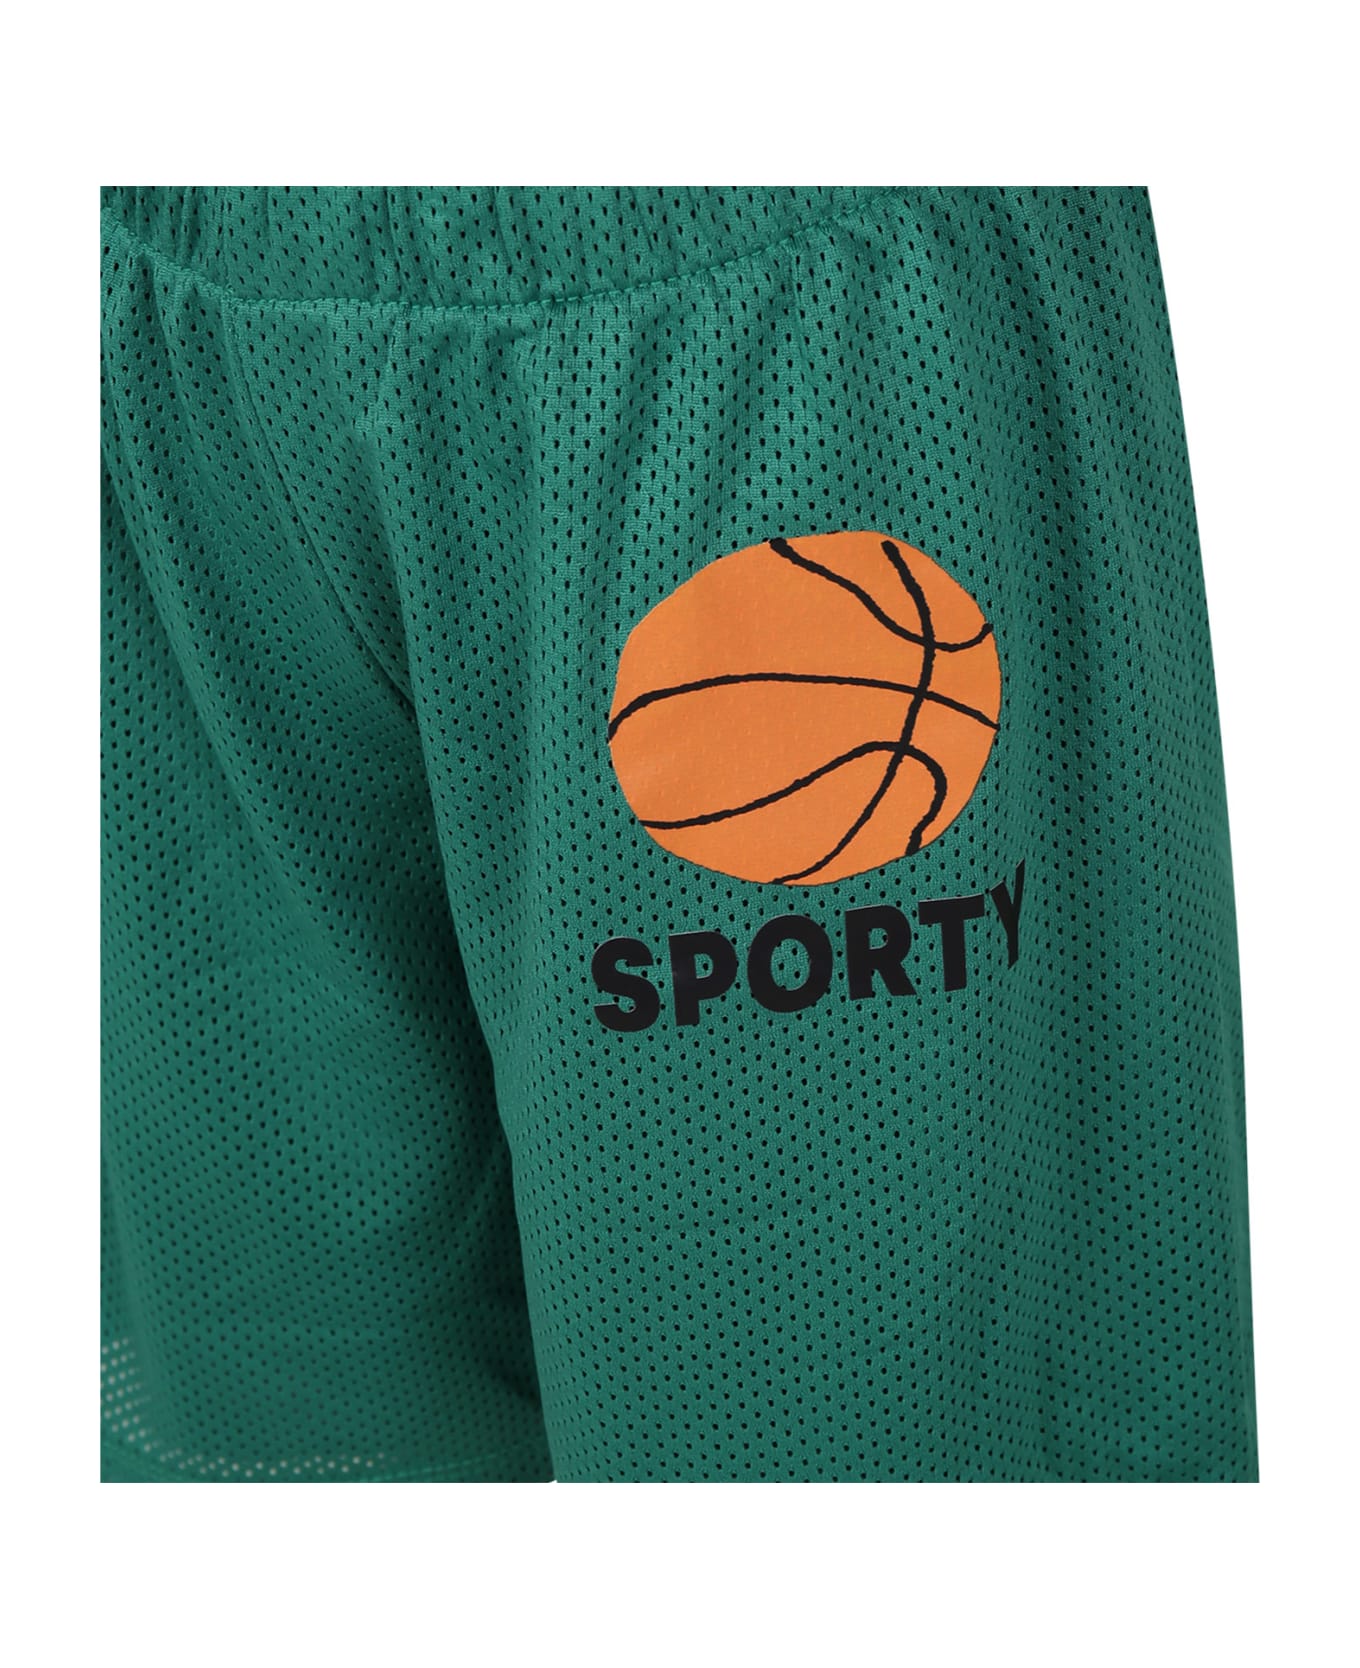 Mini Rodini Green Sports Shorts For Kids With Basketball - Green ボトムス